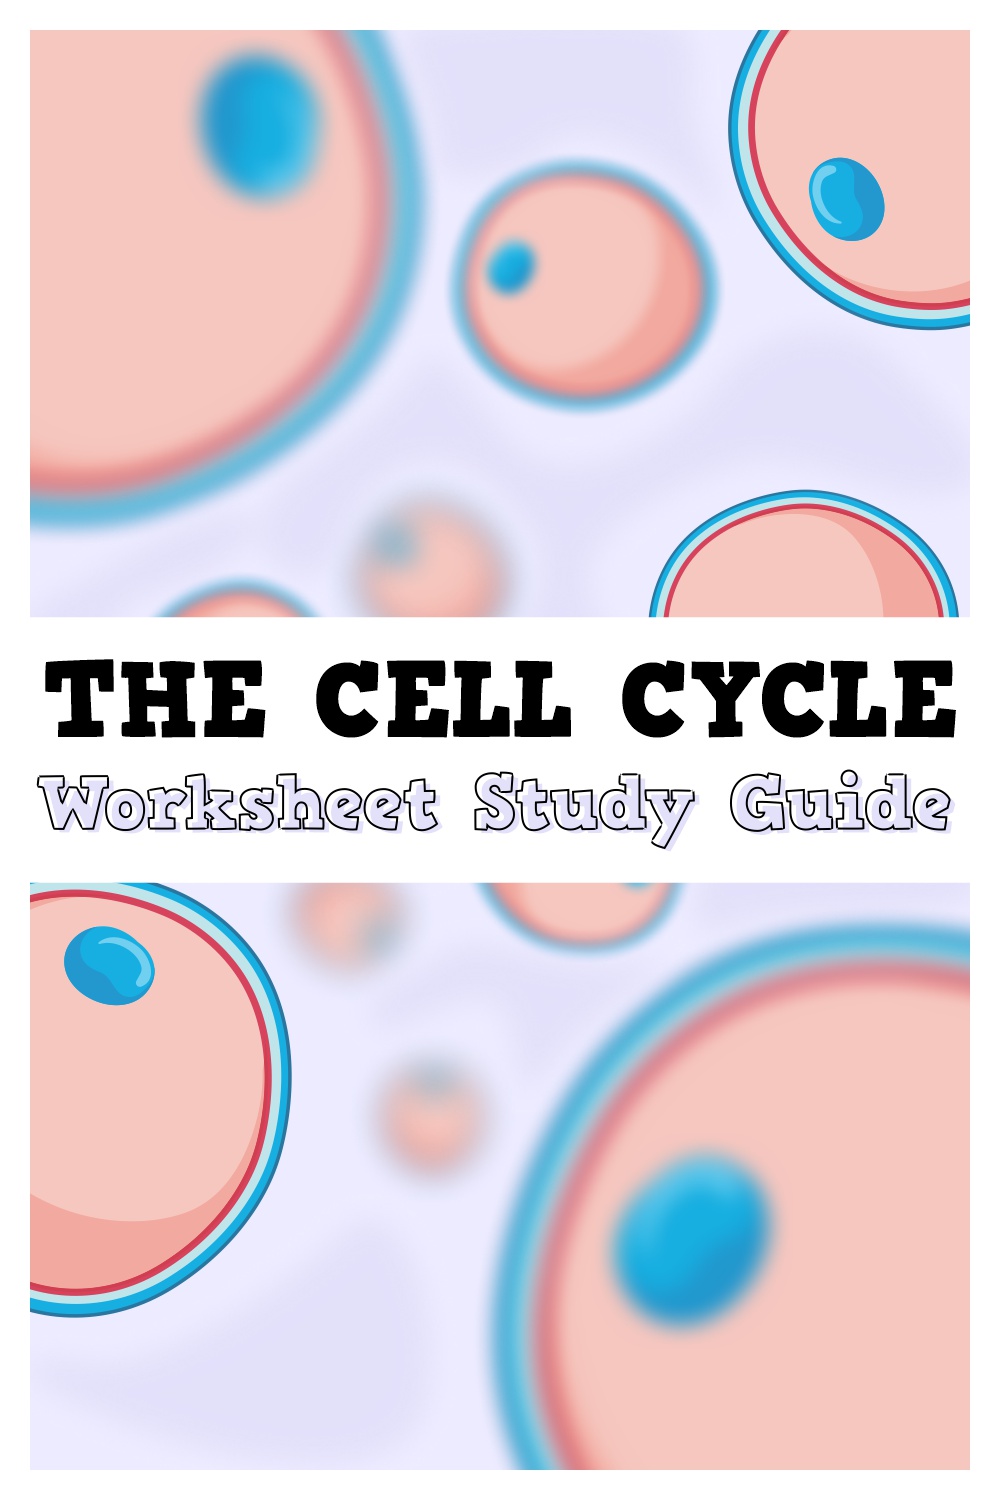 The Cell Cycle Worksheet Study Guide